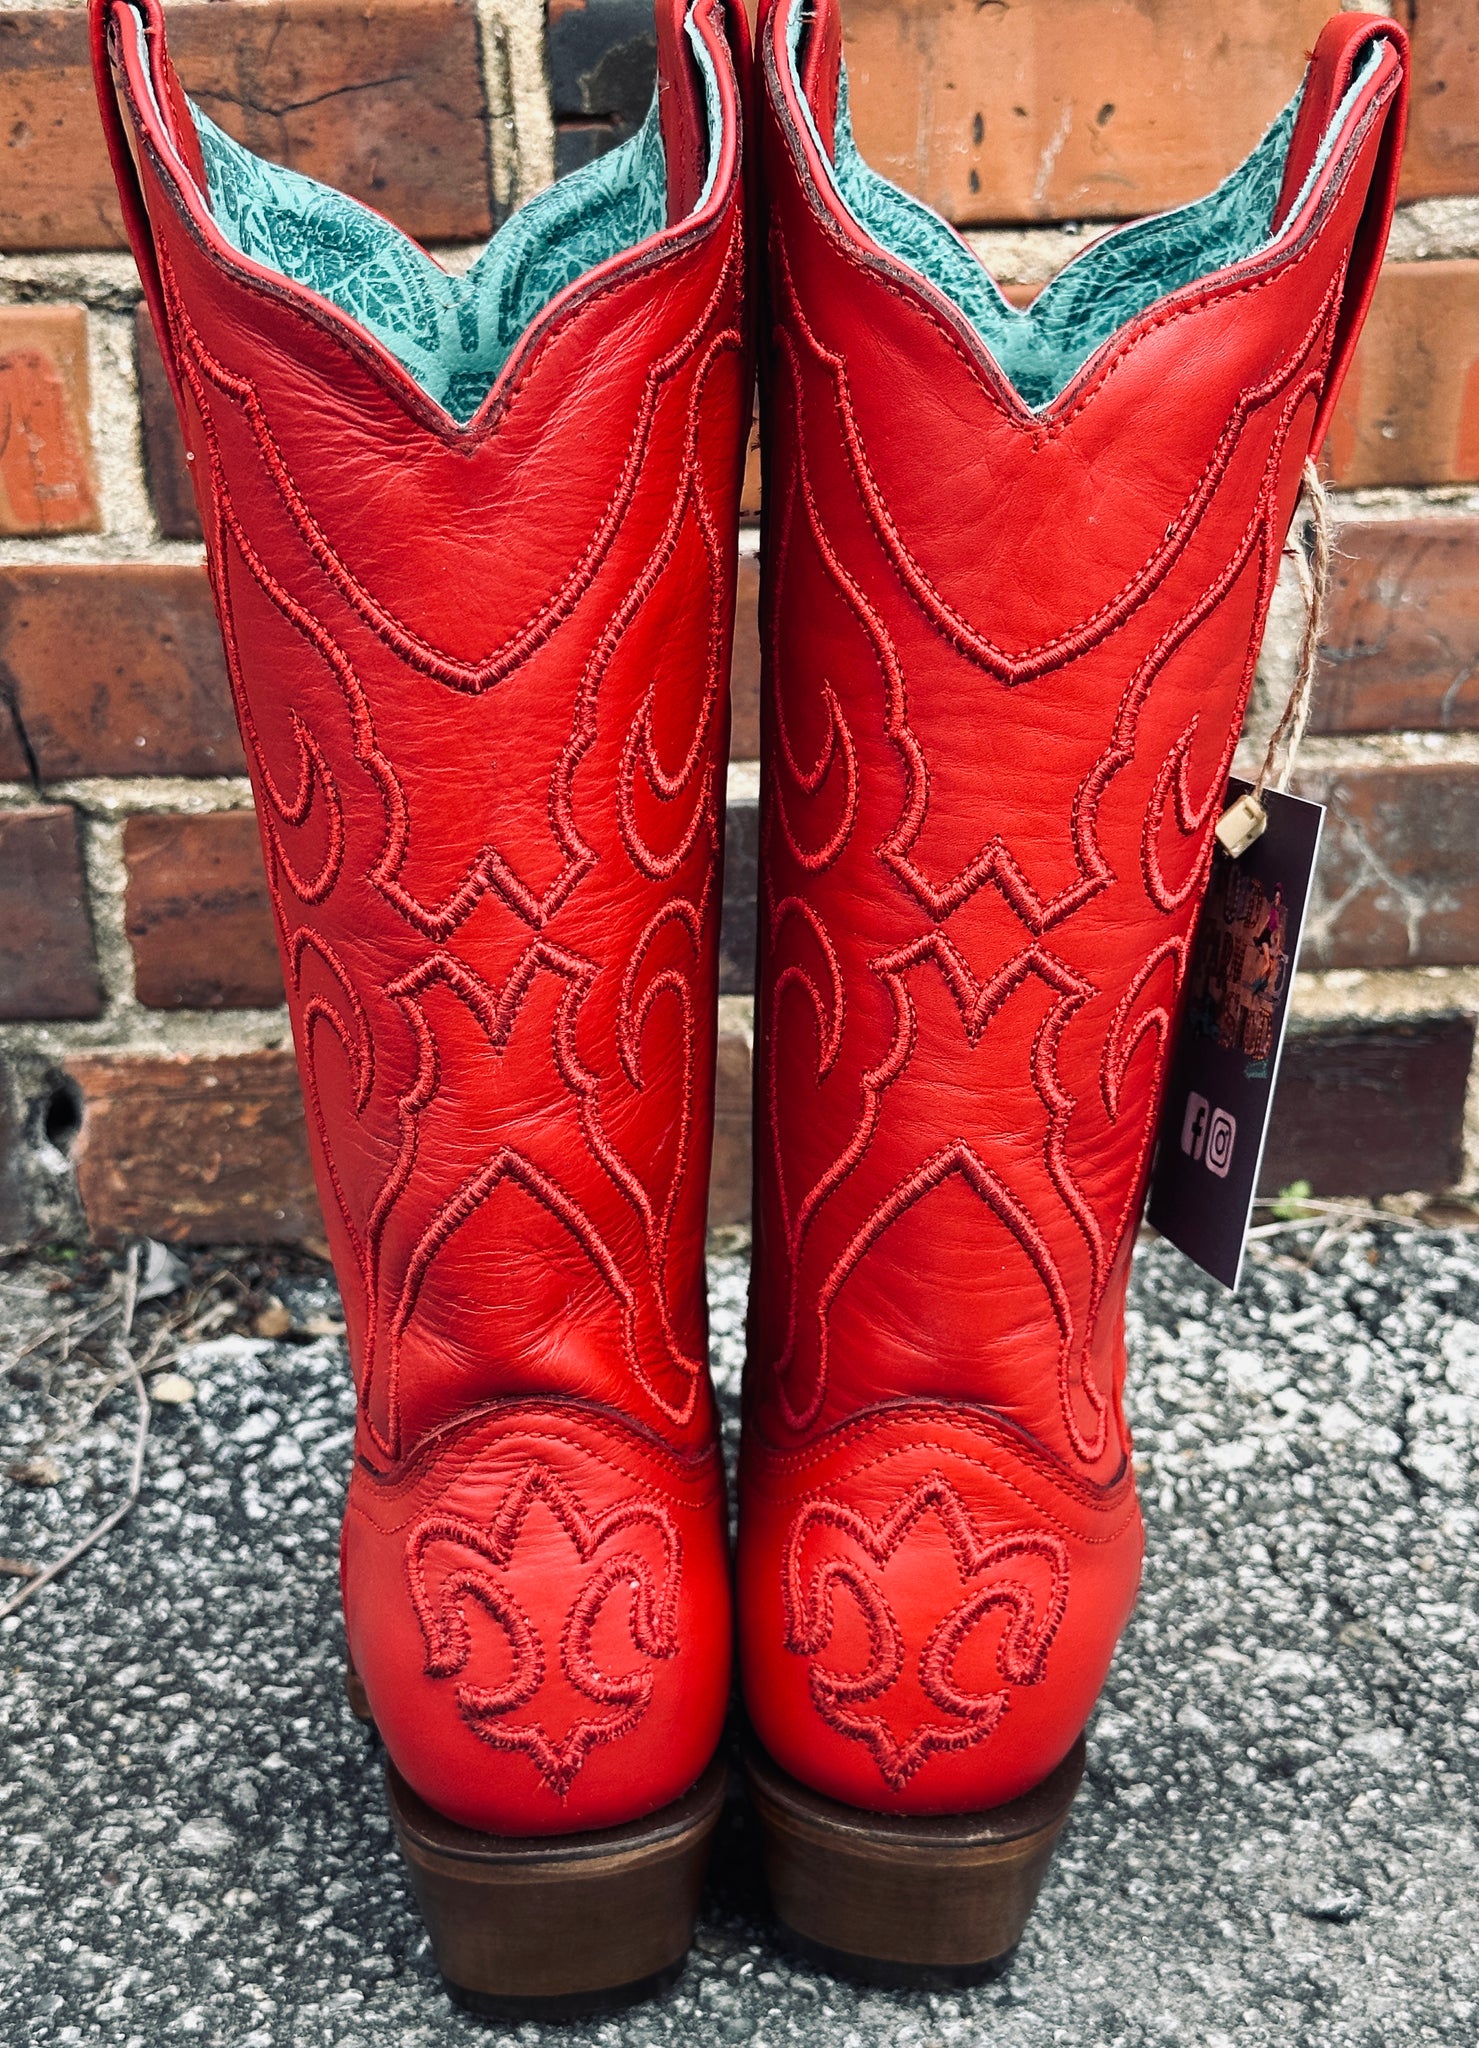 Women's Corral Red Embroidery Ankle Boot